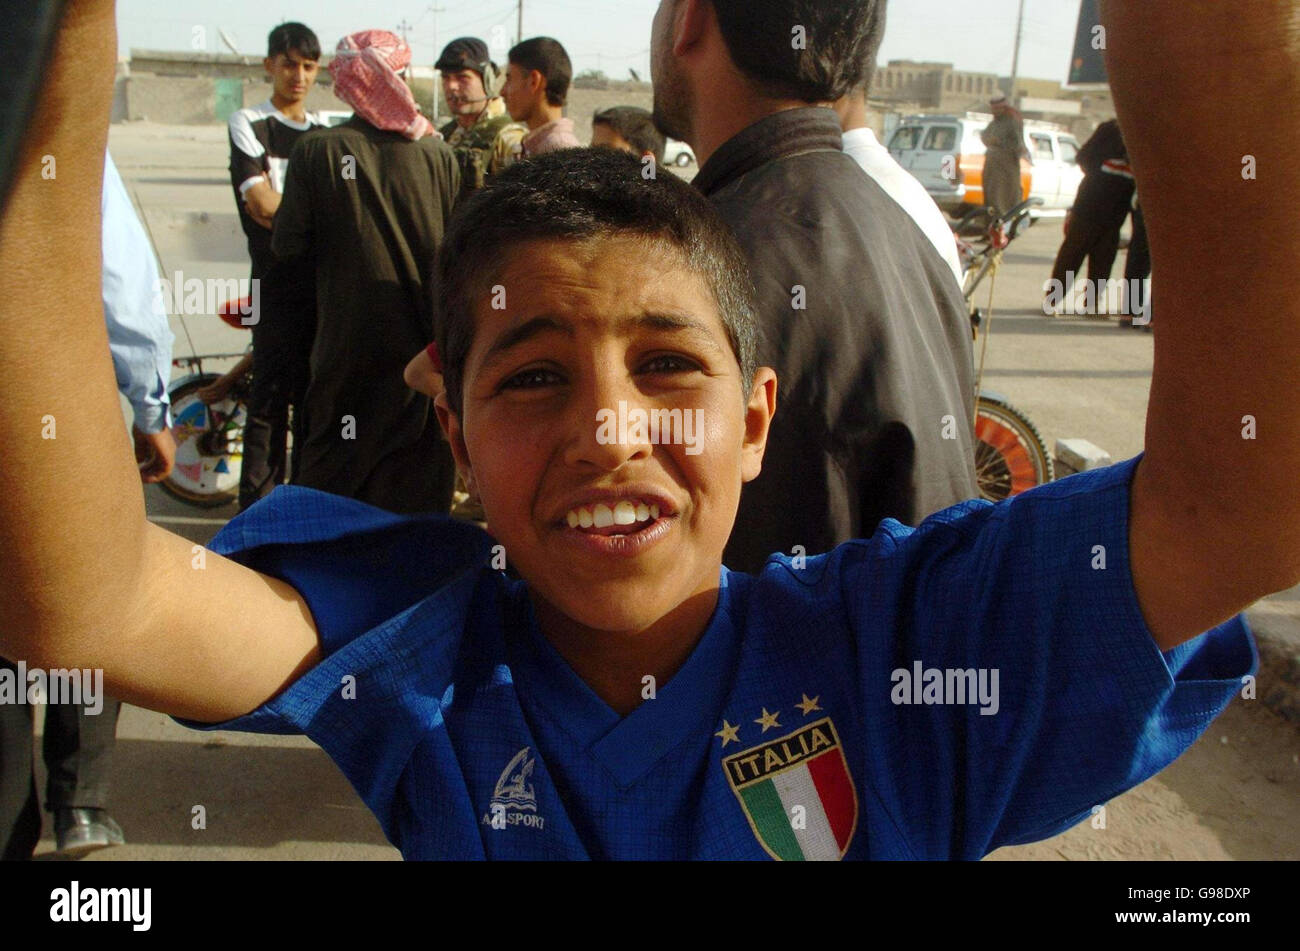 An Iraqi boy sports an Italian national football shirt on the outskirts of Az Zubayr, southern Iraq, Saturday March 18, 2006. As the third anniversary of the invasion of Iraq approaches, mixed sentiments of the ongoing presence of coaltion forces are still visible, with some openly welcoming while others are not. See PA story DEFENCE Iraq. PRESS ASSOCIATION Photo. Photo credit should read: Johnny Green/PA. Stock Photo